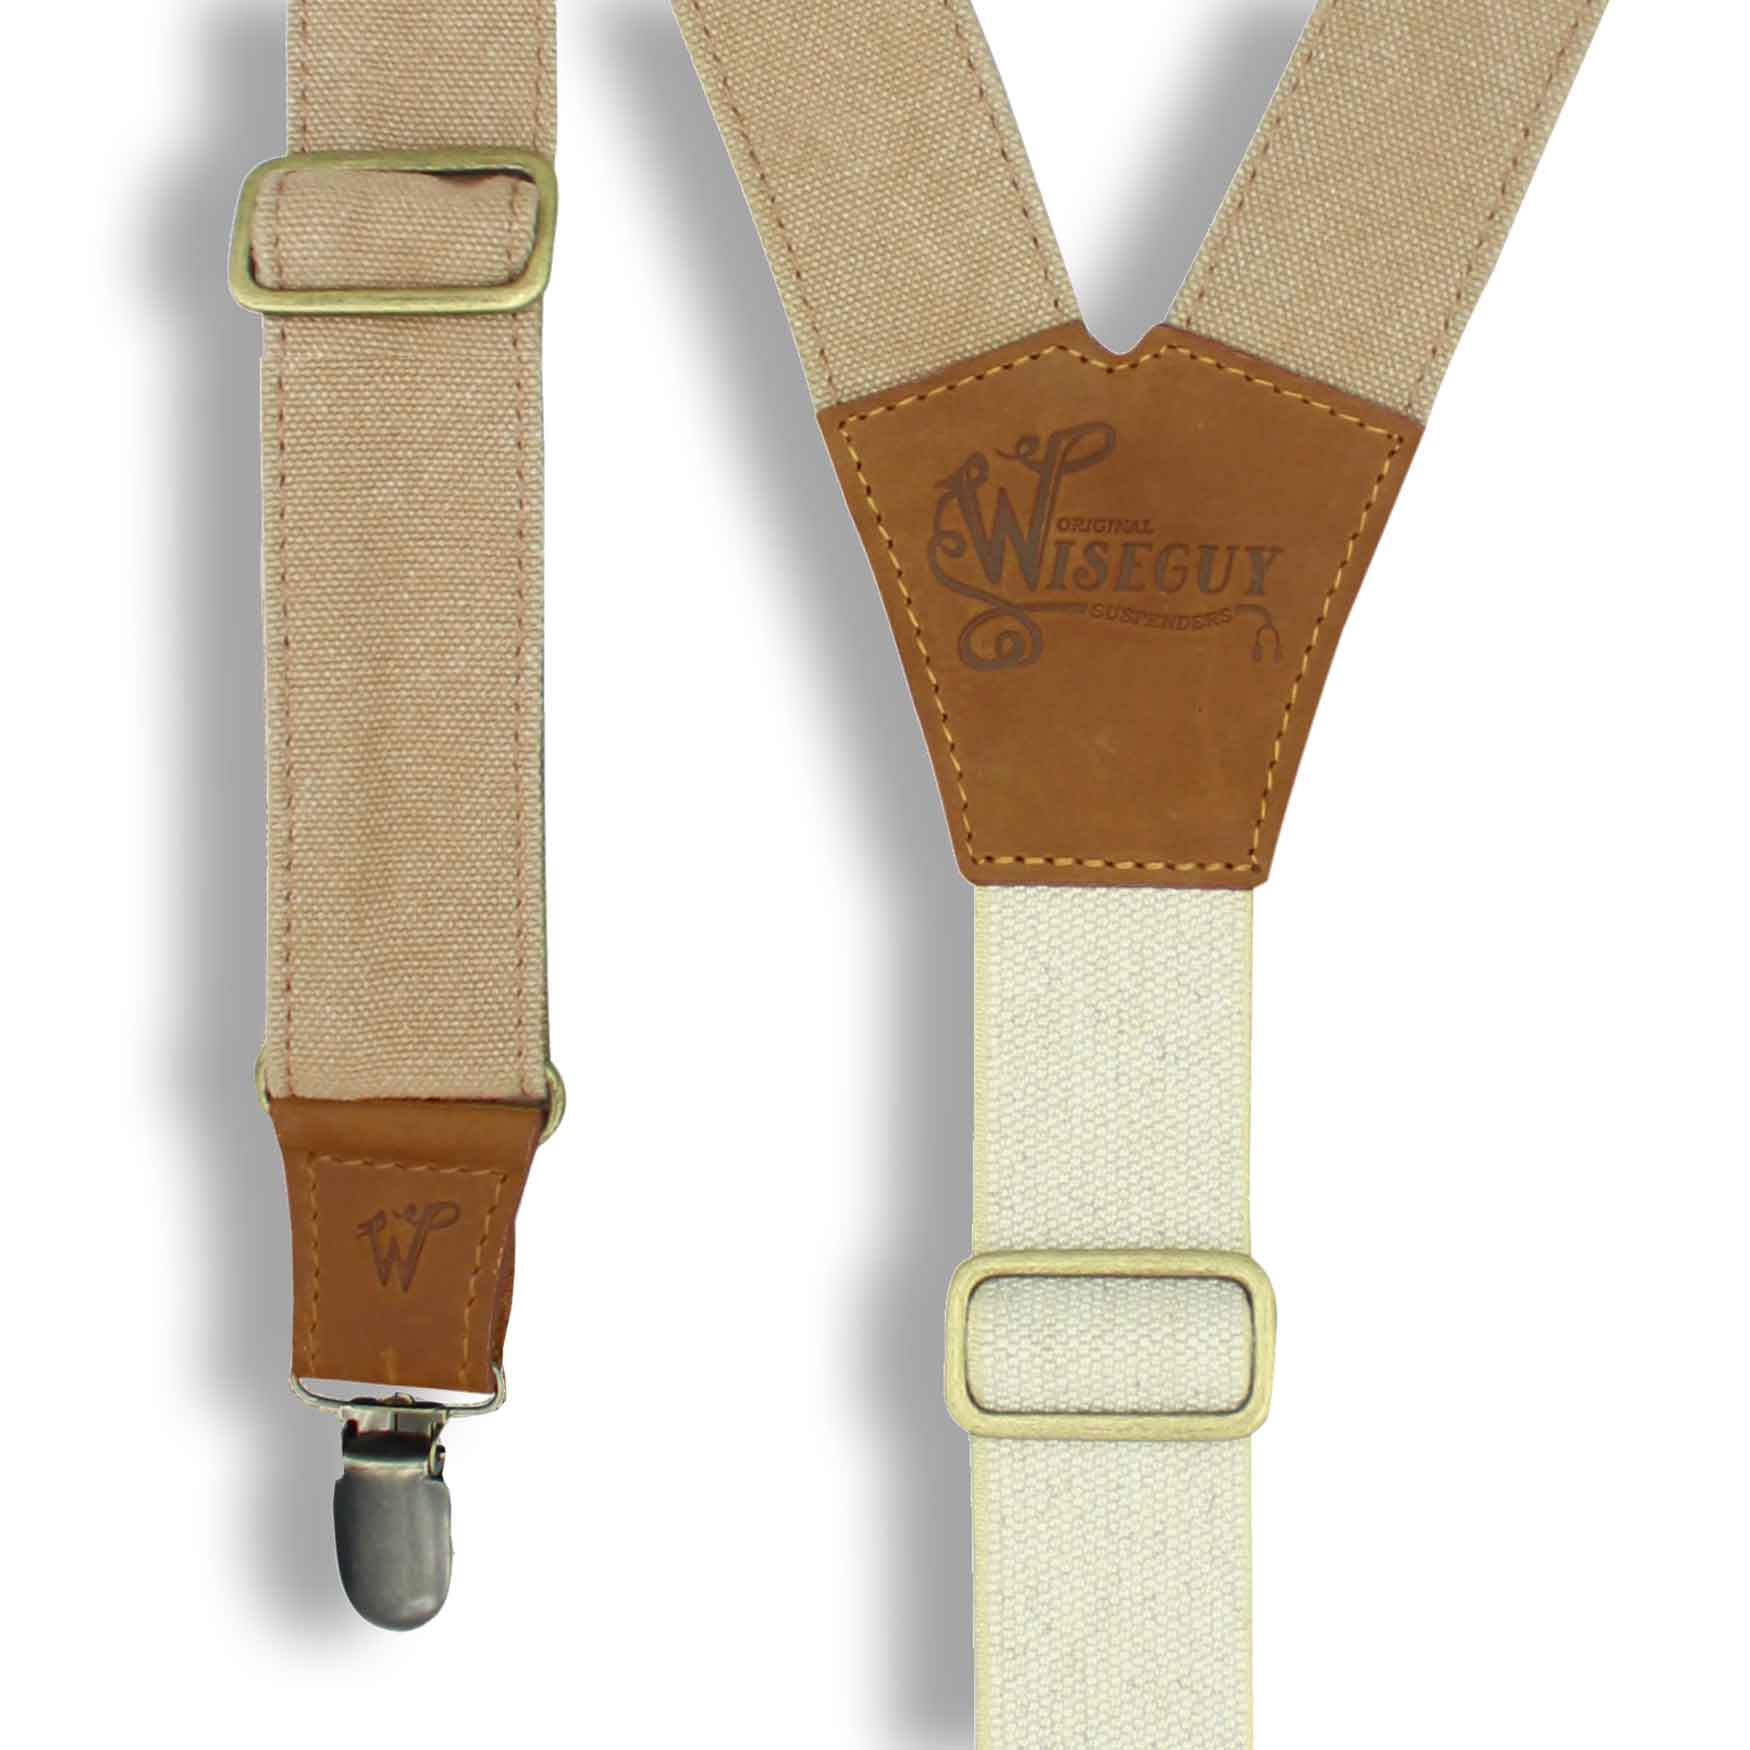 The Duck Canvas Mocca Suspenders with Elastic Sand color back strap - Wiseguy Suspenders